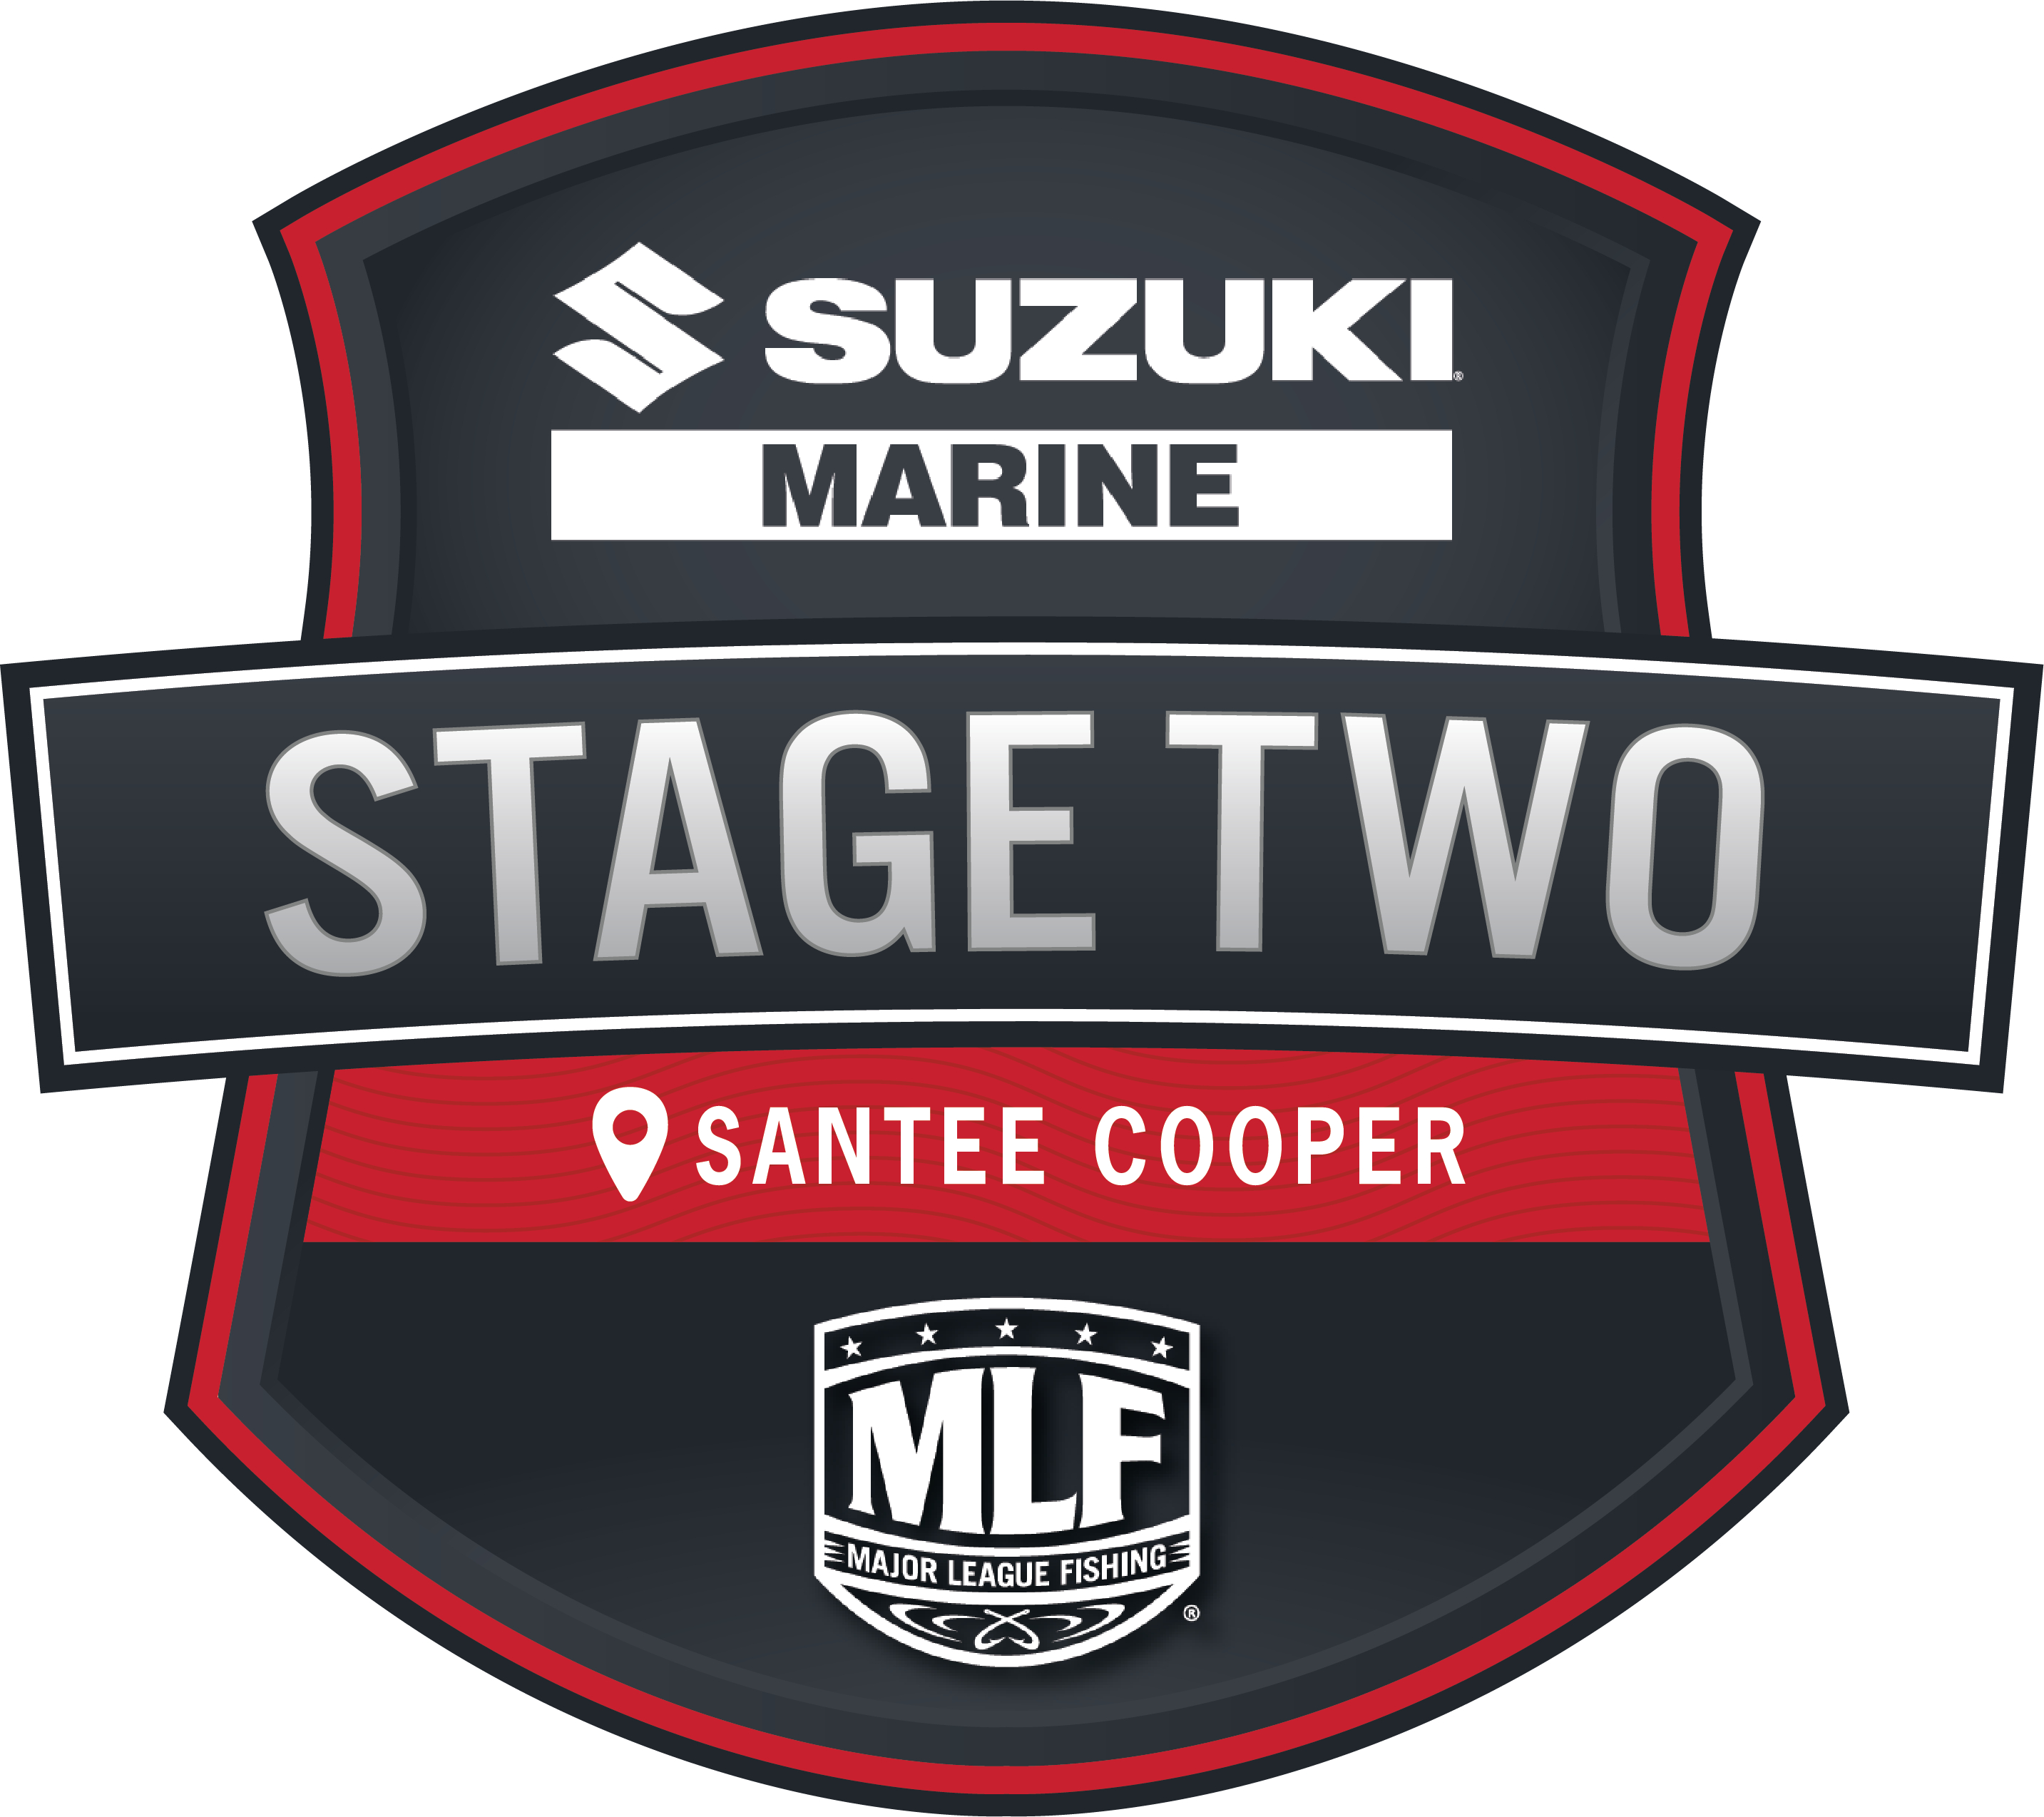 Wheeler Earns Seventh Major League Fishing Bass Pro Tour Victory at Suzuki  Stage Two Presented by Fenwick at Santee Cooper Lakes